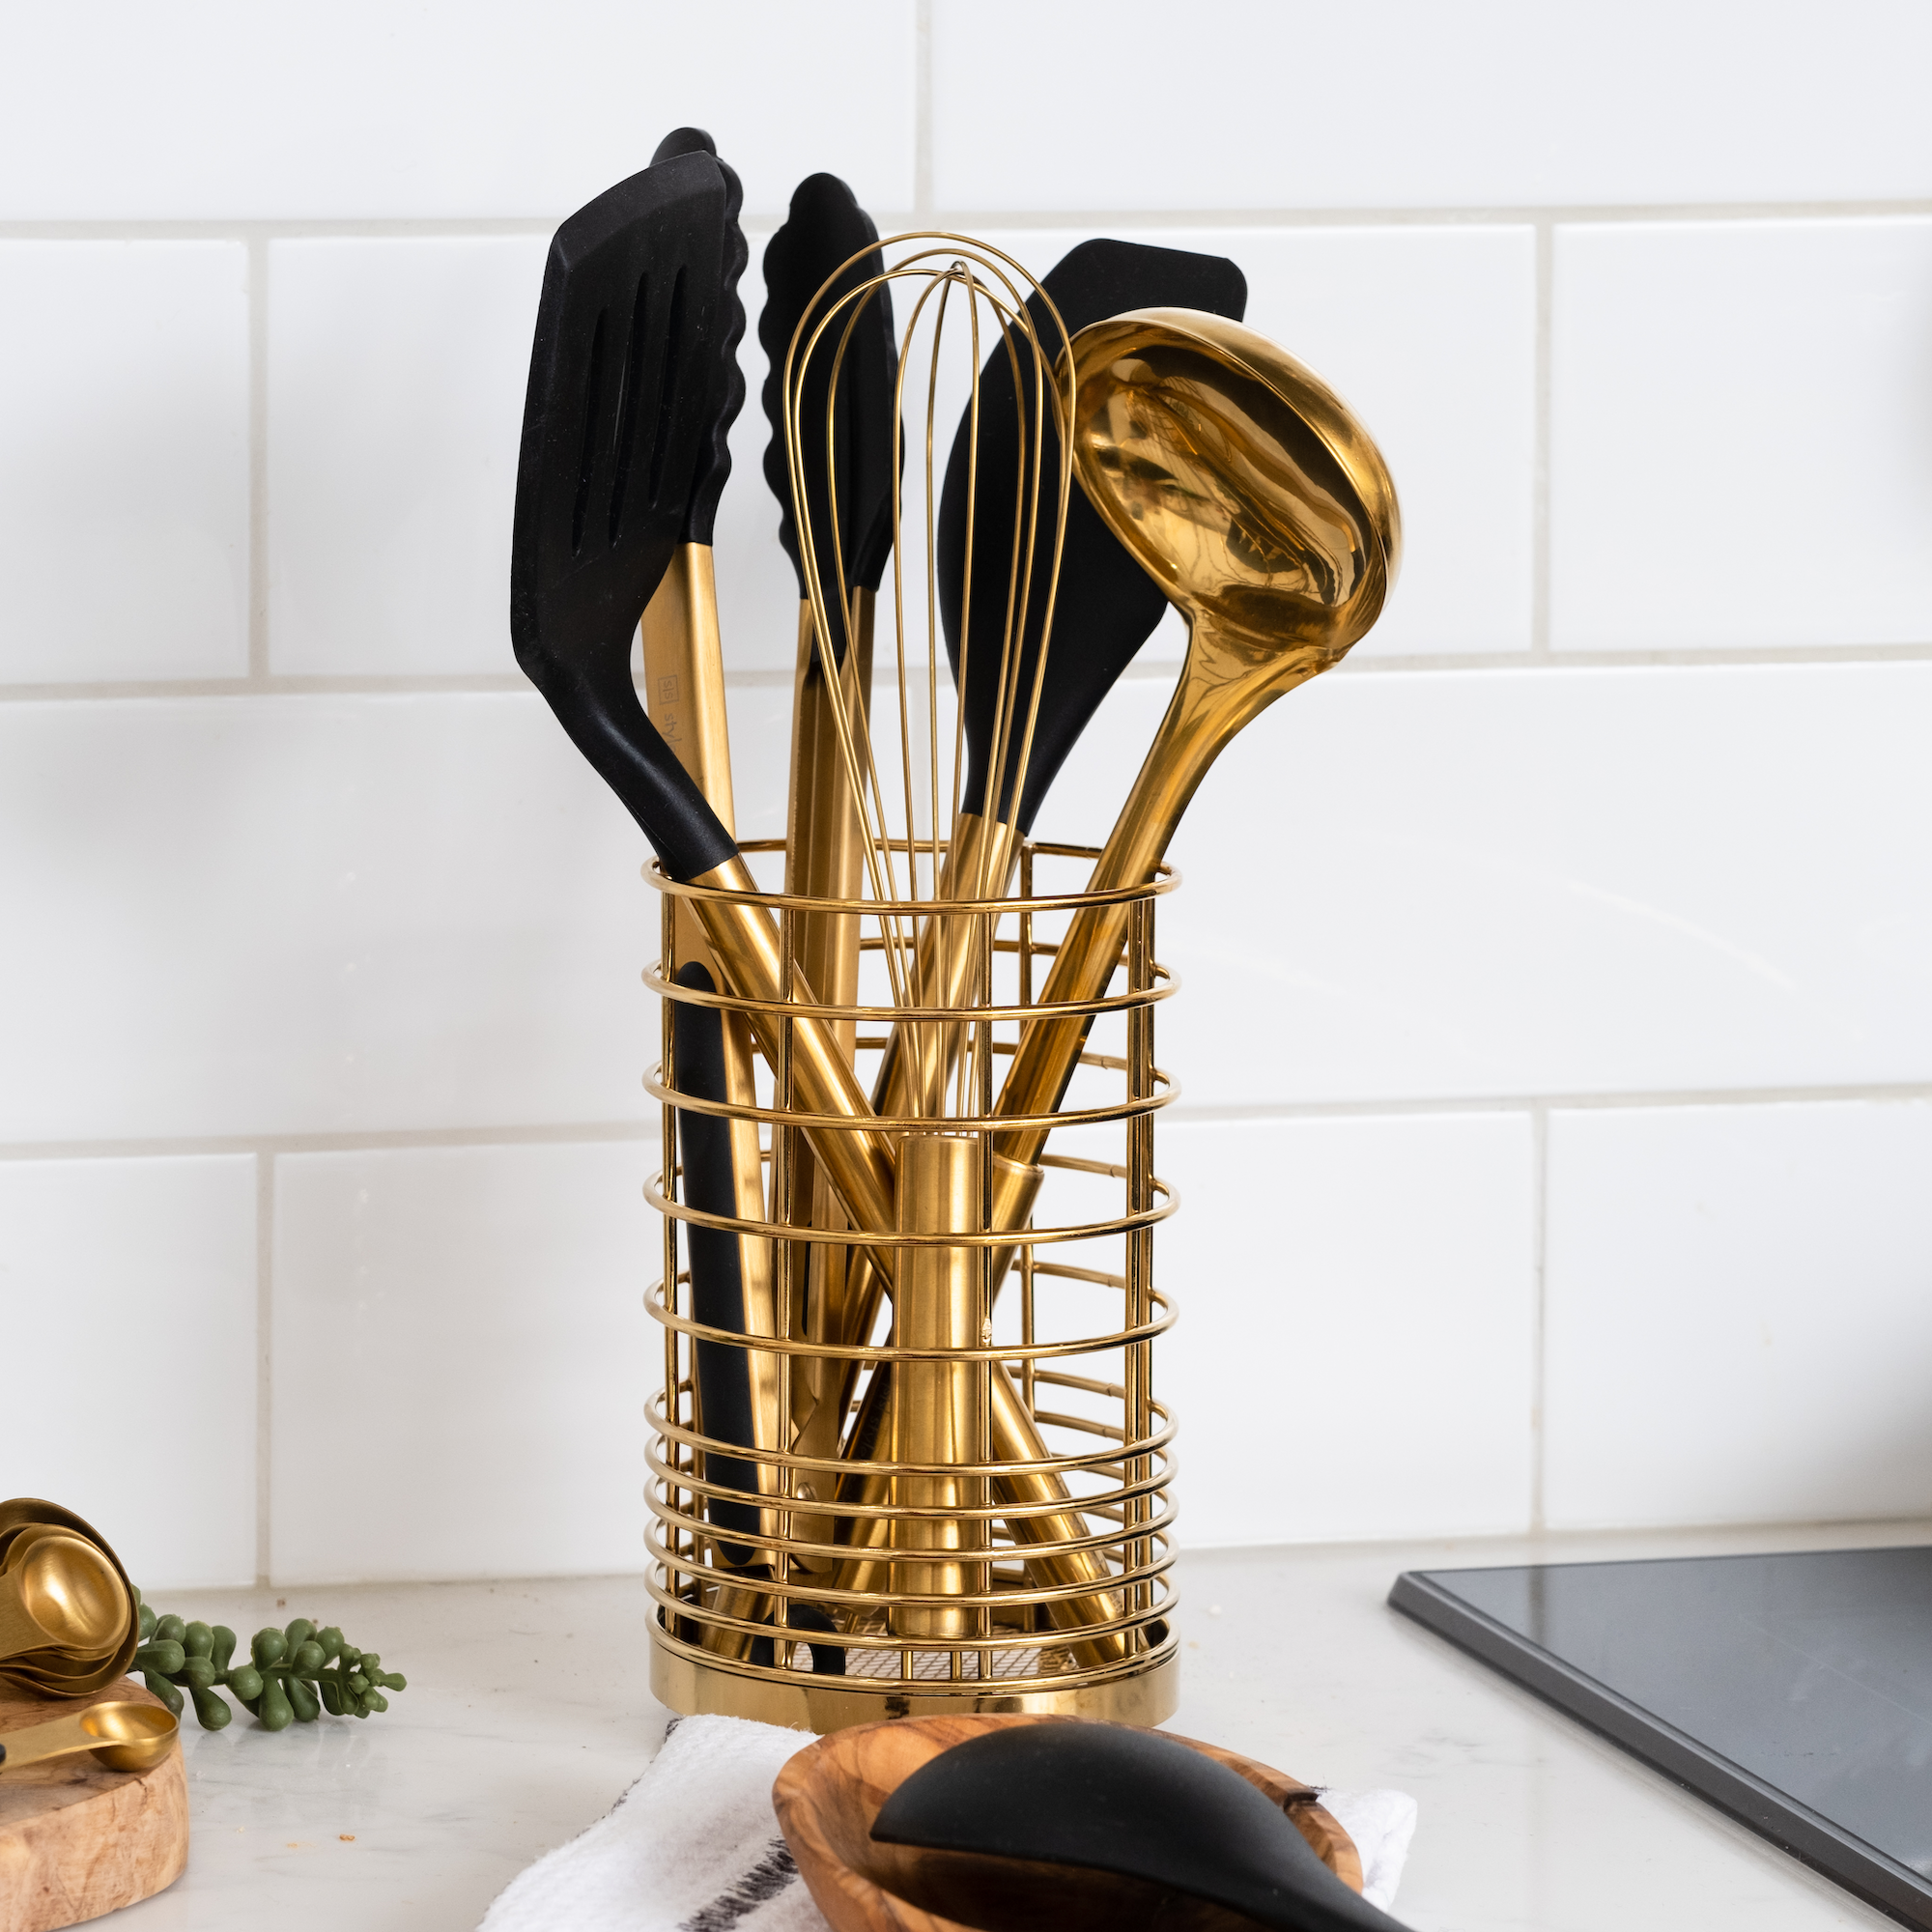 Black and Gold Kitchen Utensils Set with Holder - Styled Settings